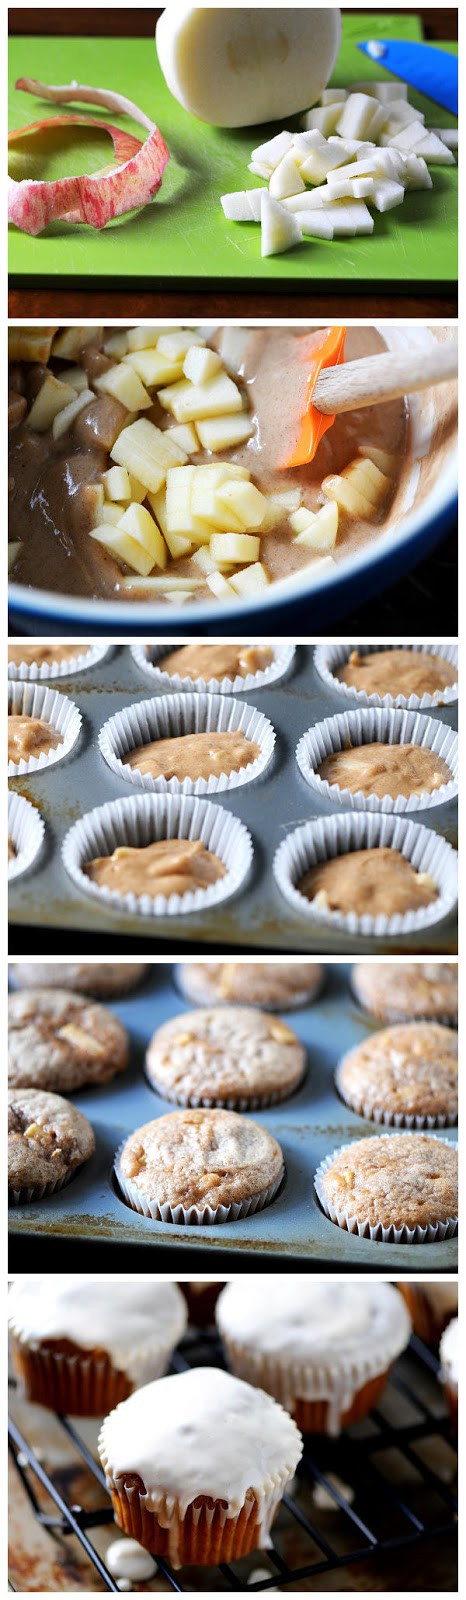 Gourmet Cupcake Recipes Using Cake Mix
 Frosted Apple Pie Cupcakes